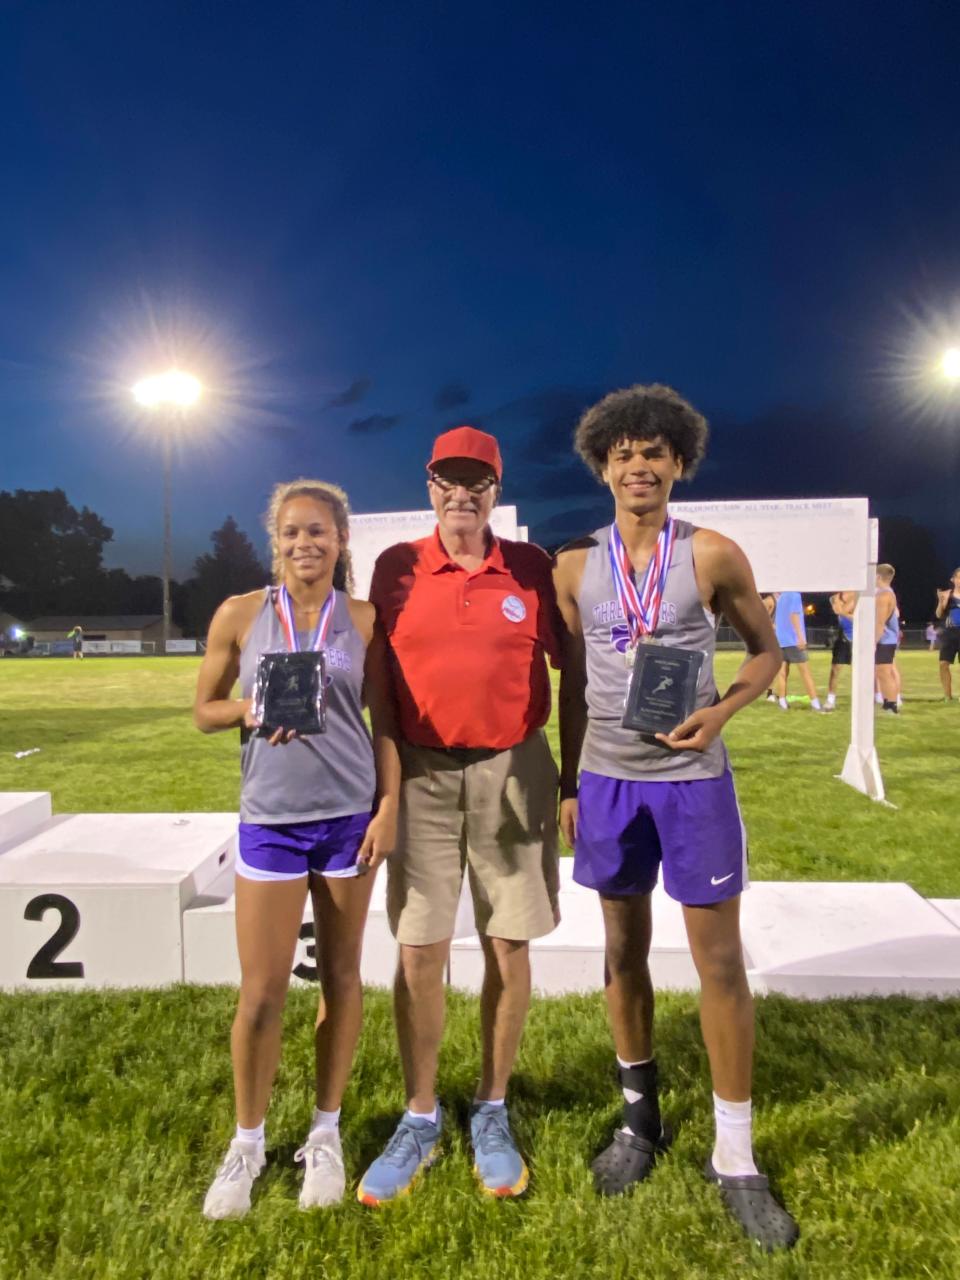 Winners of the Tim Baker award at this year's county track meet were Kylin Griffin and Jordan Pisco of Three Rivers.